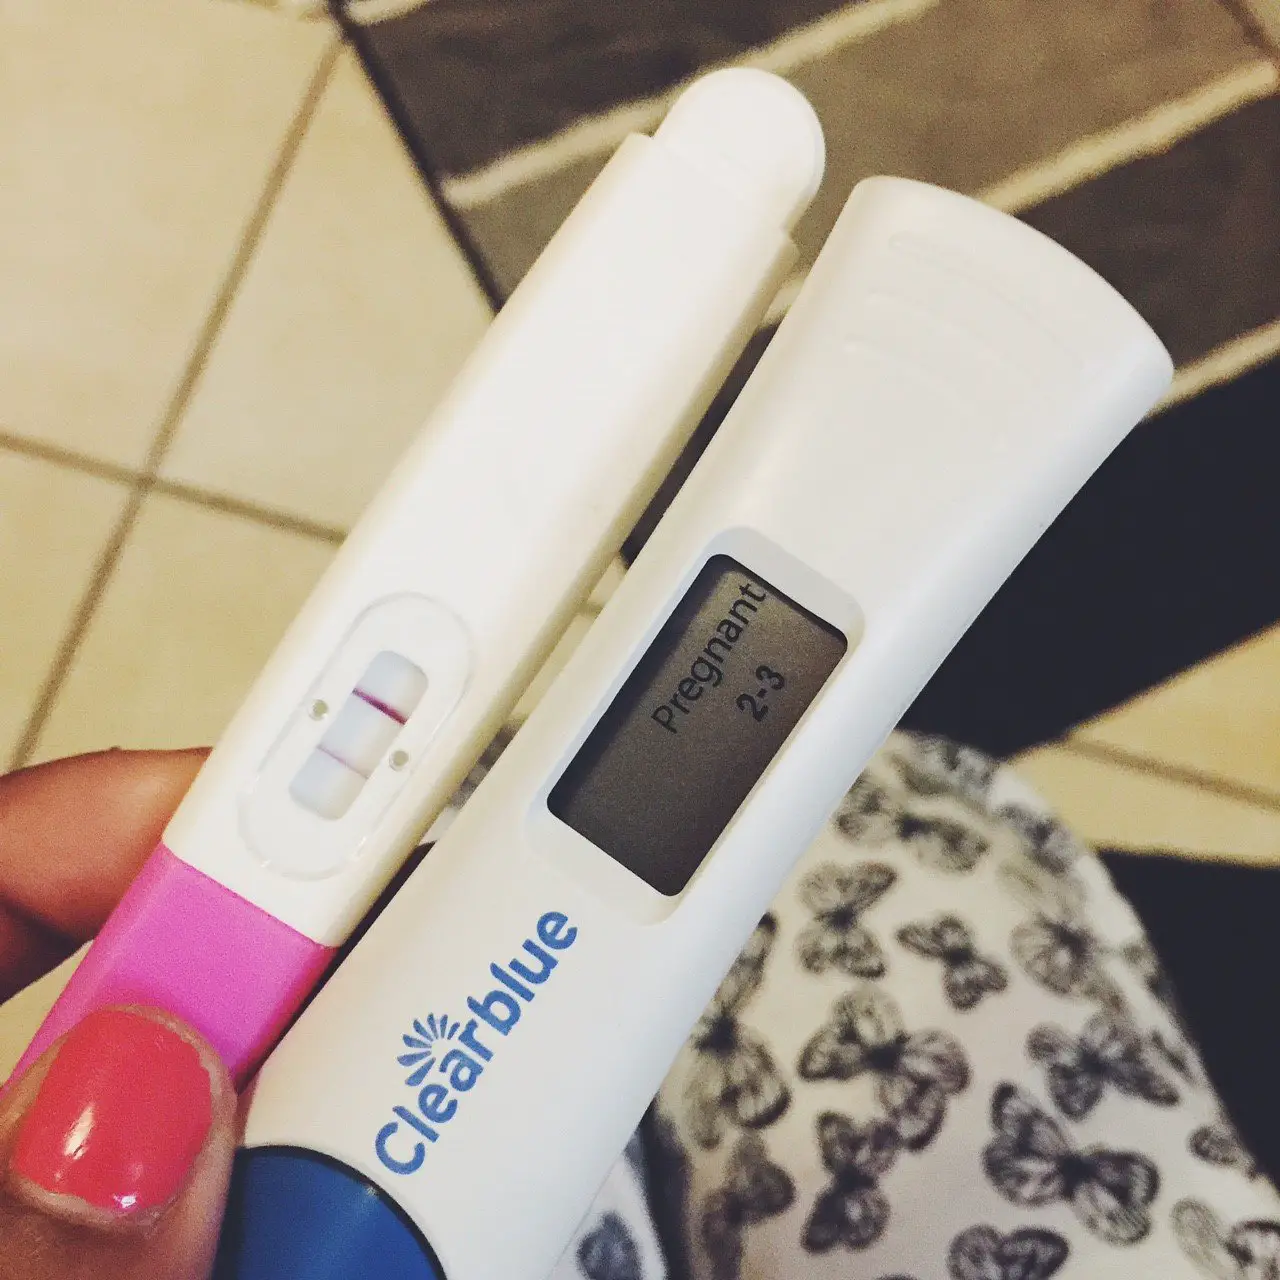 I fell pregnant while I was on my birth control pill